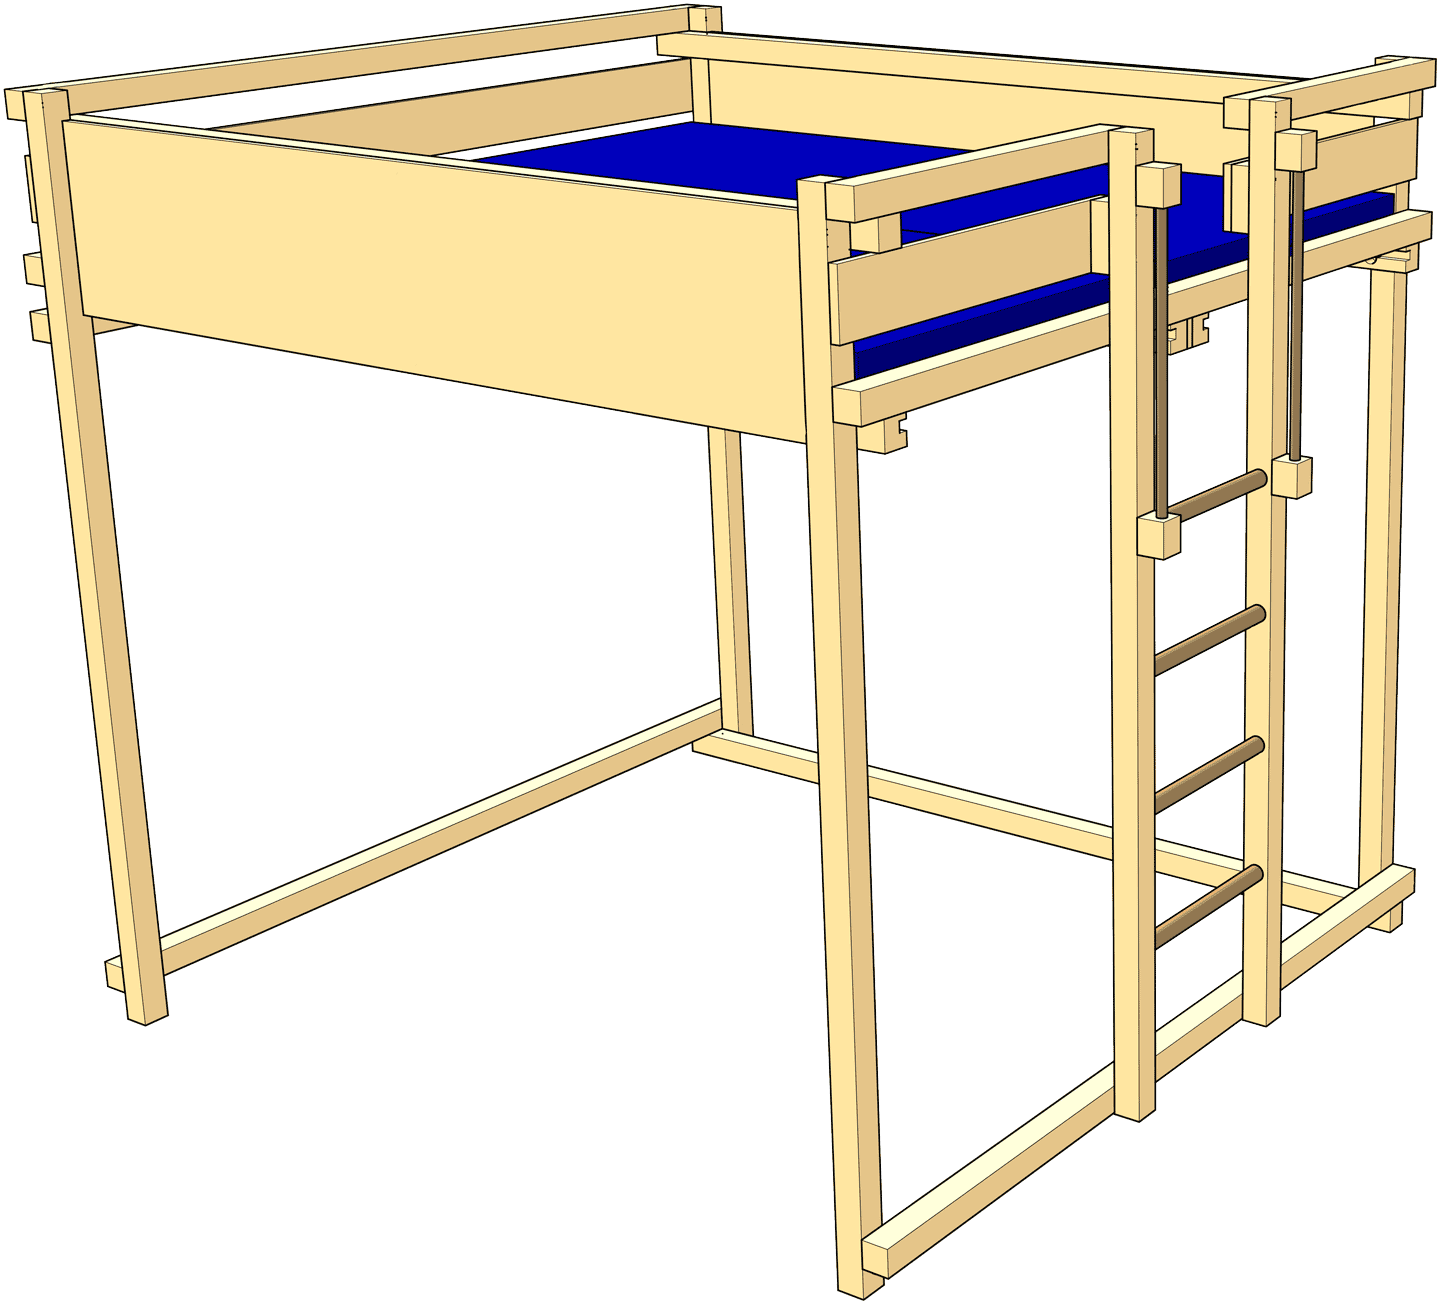 Double loft bed: loft bed with extra-wide sleeping level (Loft Beds)